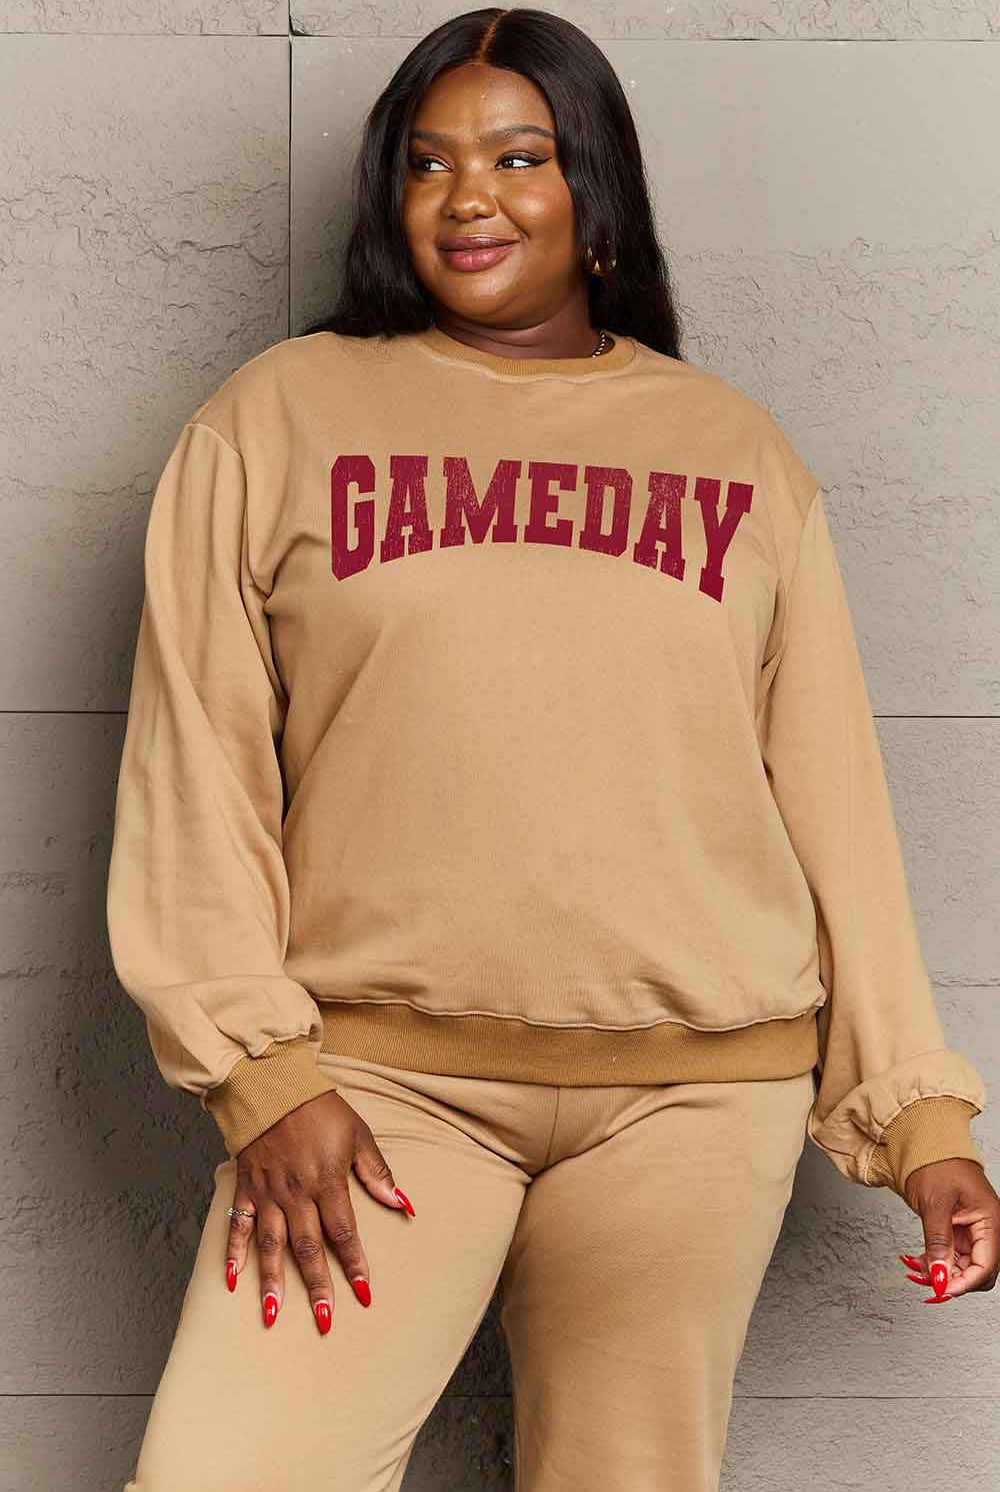 Rosy Brown Simply Love Simply Love Full Size GAMEDAY Graphic Sweatshirt Sweatshirts